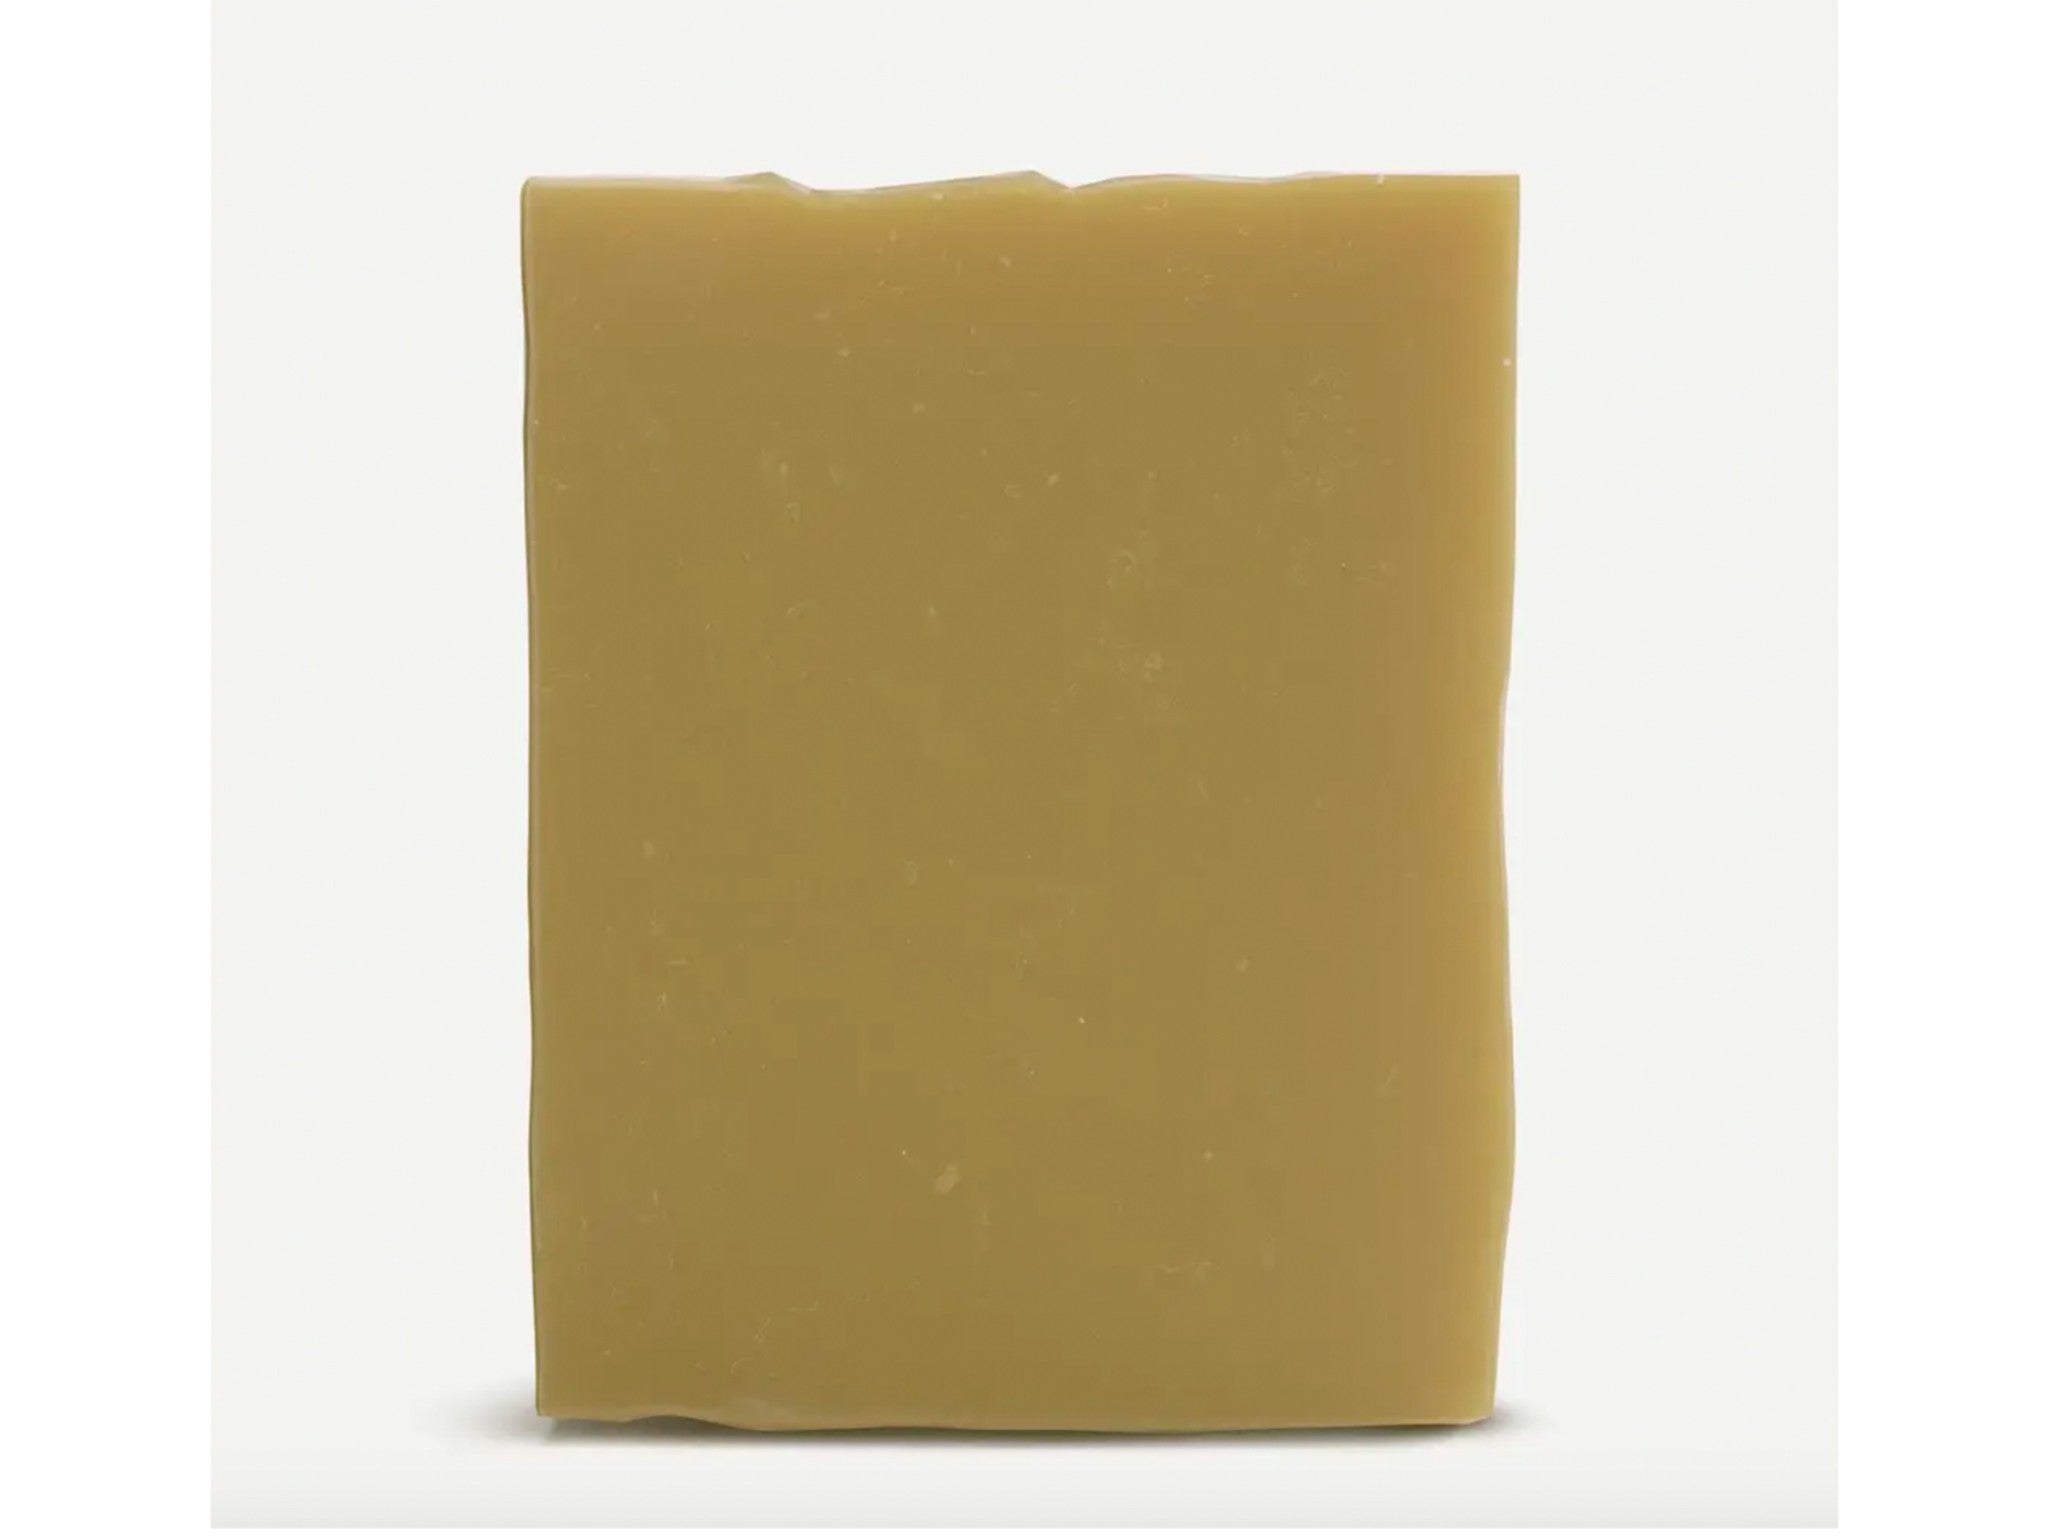 Typology purifying cleanser bar with nettle indybest.jpg